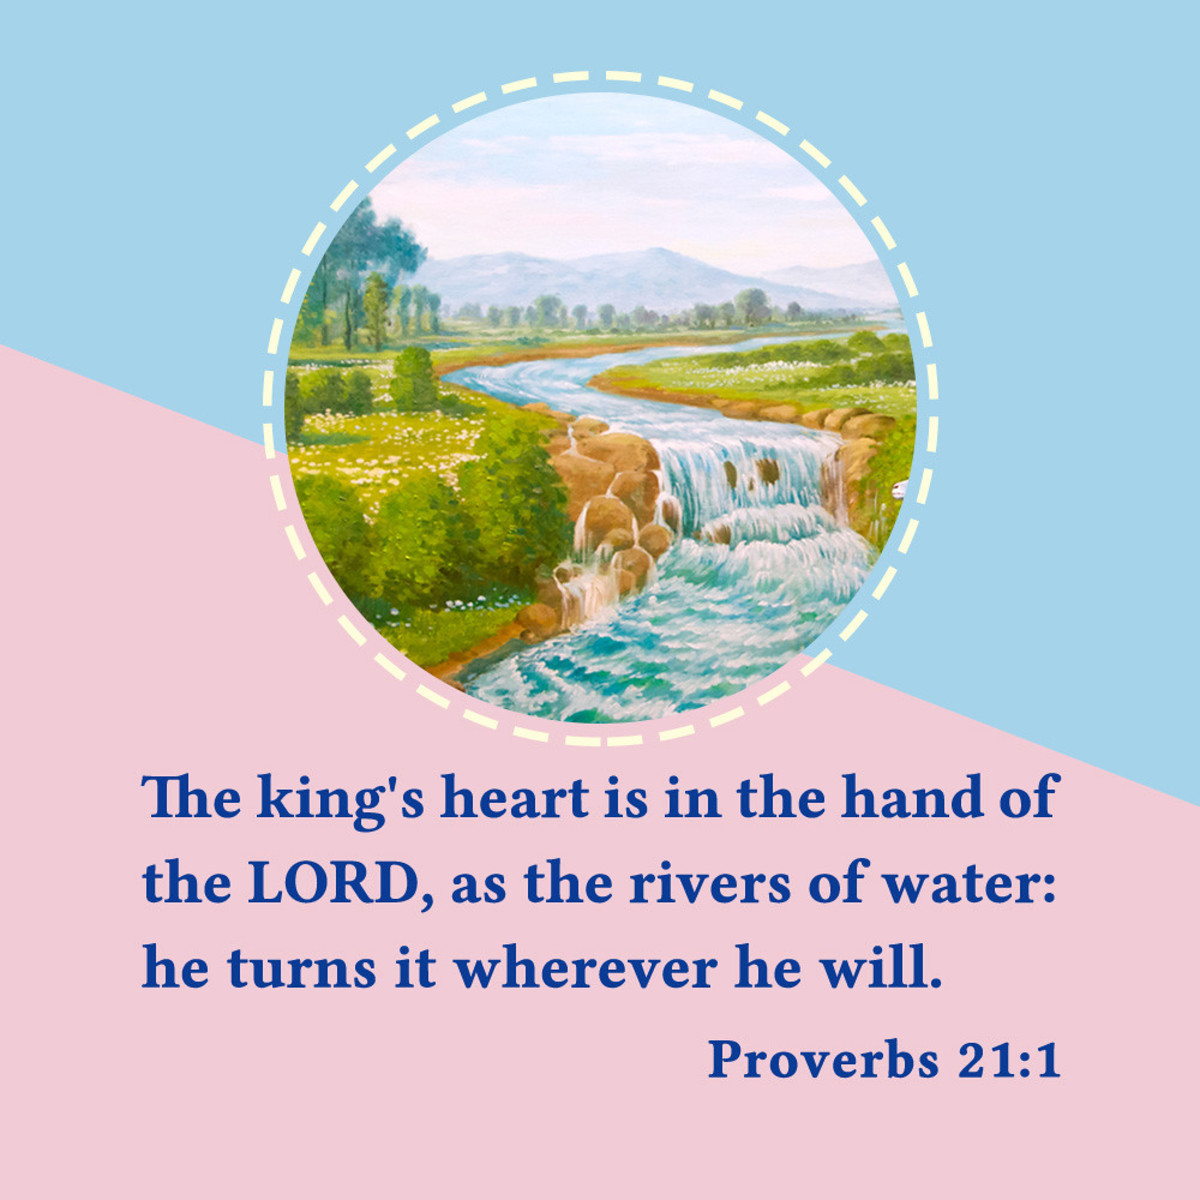 a-hymn-the-kings-heart-is-in-the-hand-of-the-lord